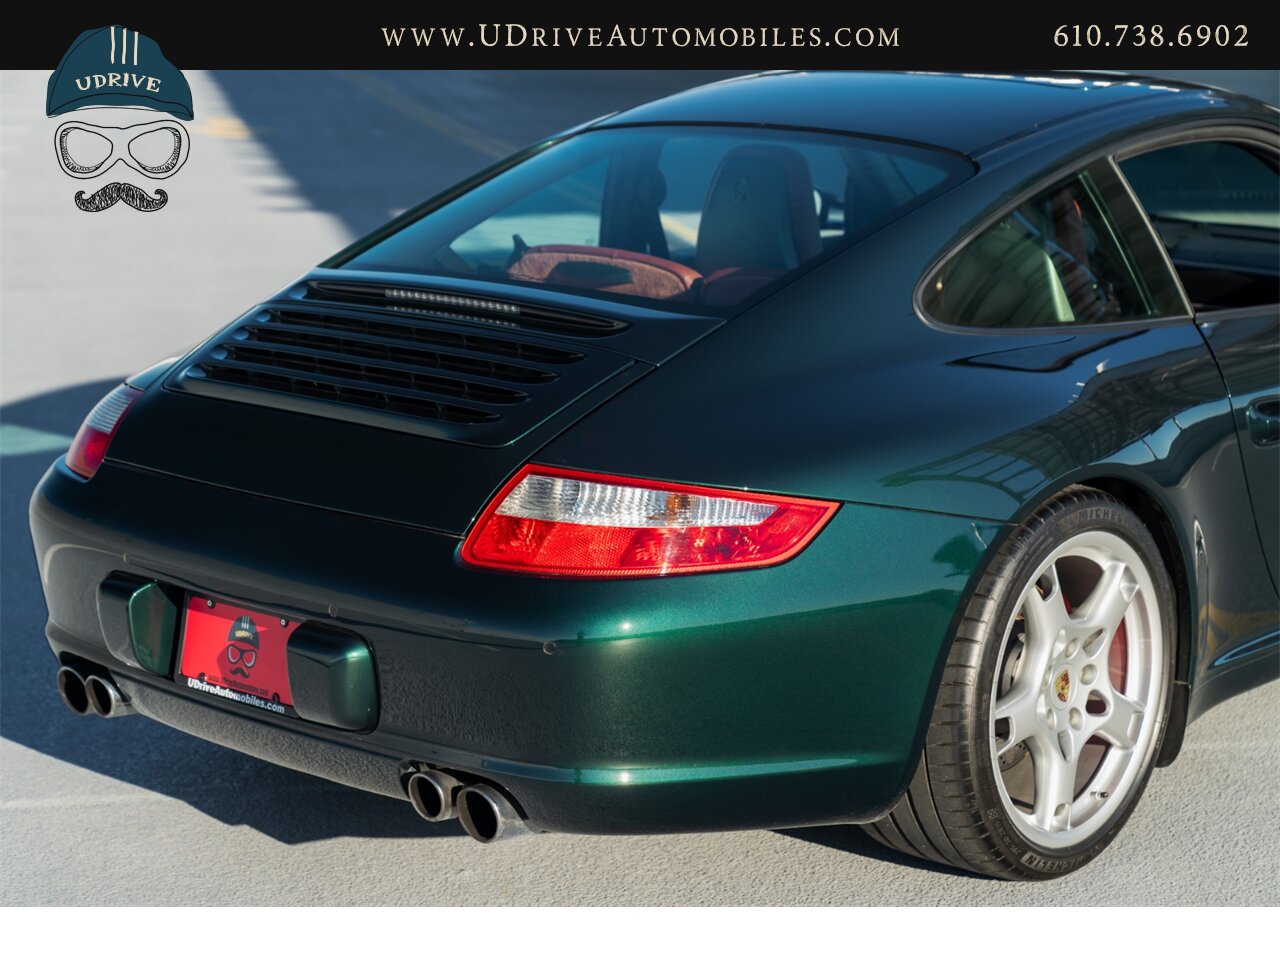 2007 Porsche 911 Carrera S 6Spd 997S RARE X51 Power Kit 381hp  1 of a Kind Forest Green over Blk/Terracotta Chrono Adap Sport Sts $113k MSRP - Photo 19 - West Chester, PA 19382